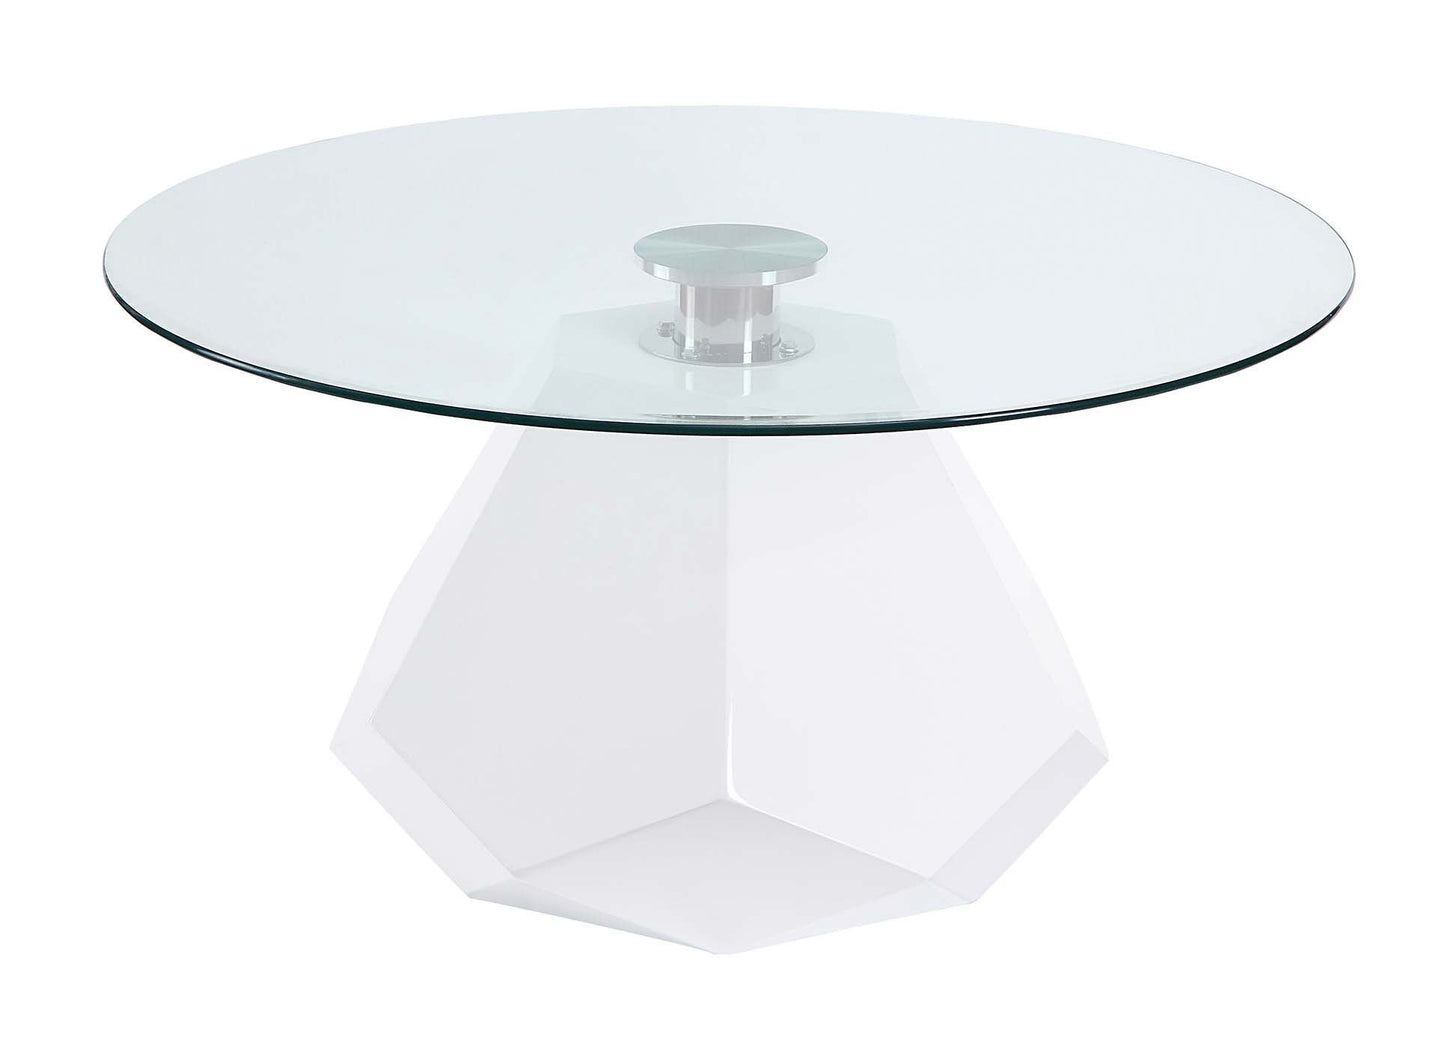 Chara Coffee Table with White High Gloss Finish and Clear Glass Top